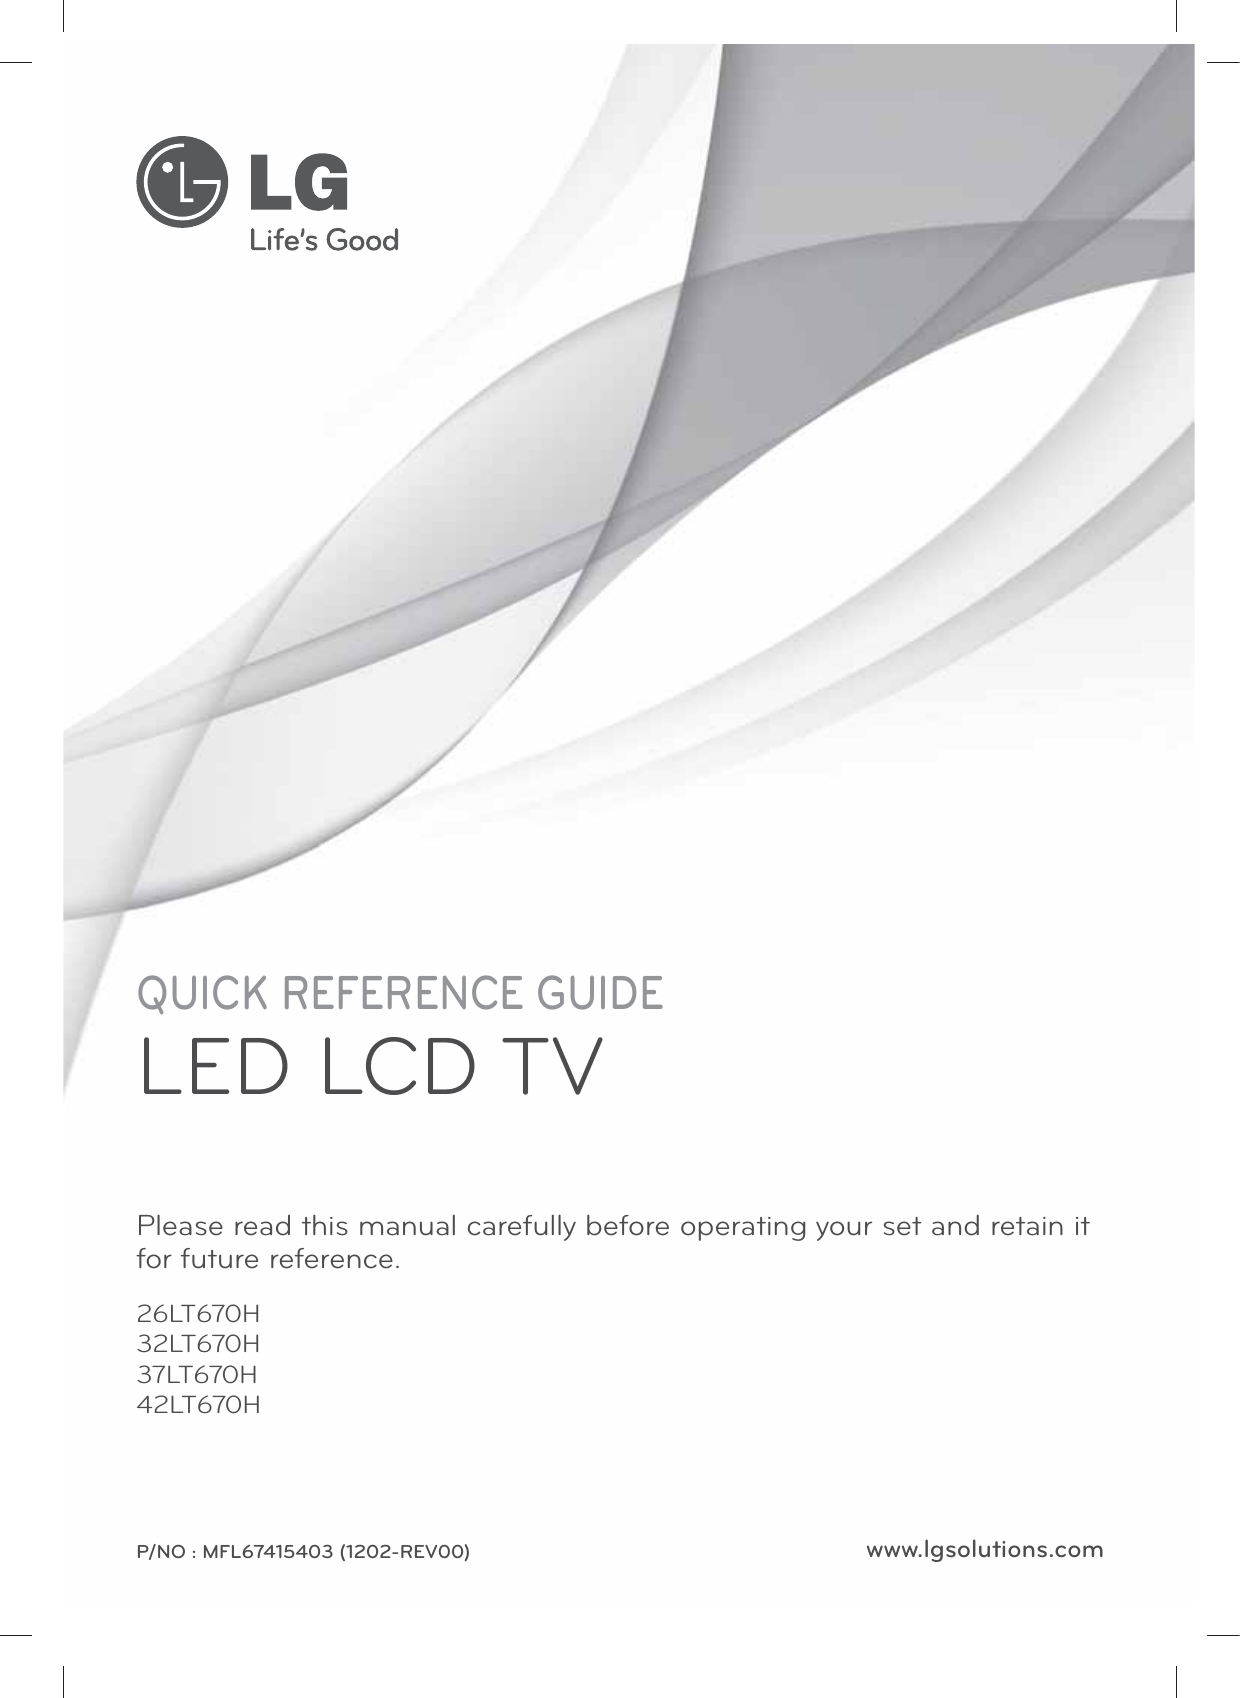 www.lgsolutions.comQUICK REFERENCE GUIDELED LCD TVPlease read this manual carefully before operating your set and retain it for future reference.26LT670H32LT670H37LT670H42LT670HP/NO : MFL67415403 (1202-REV00)